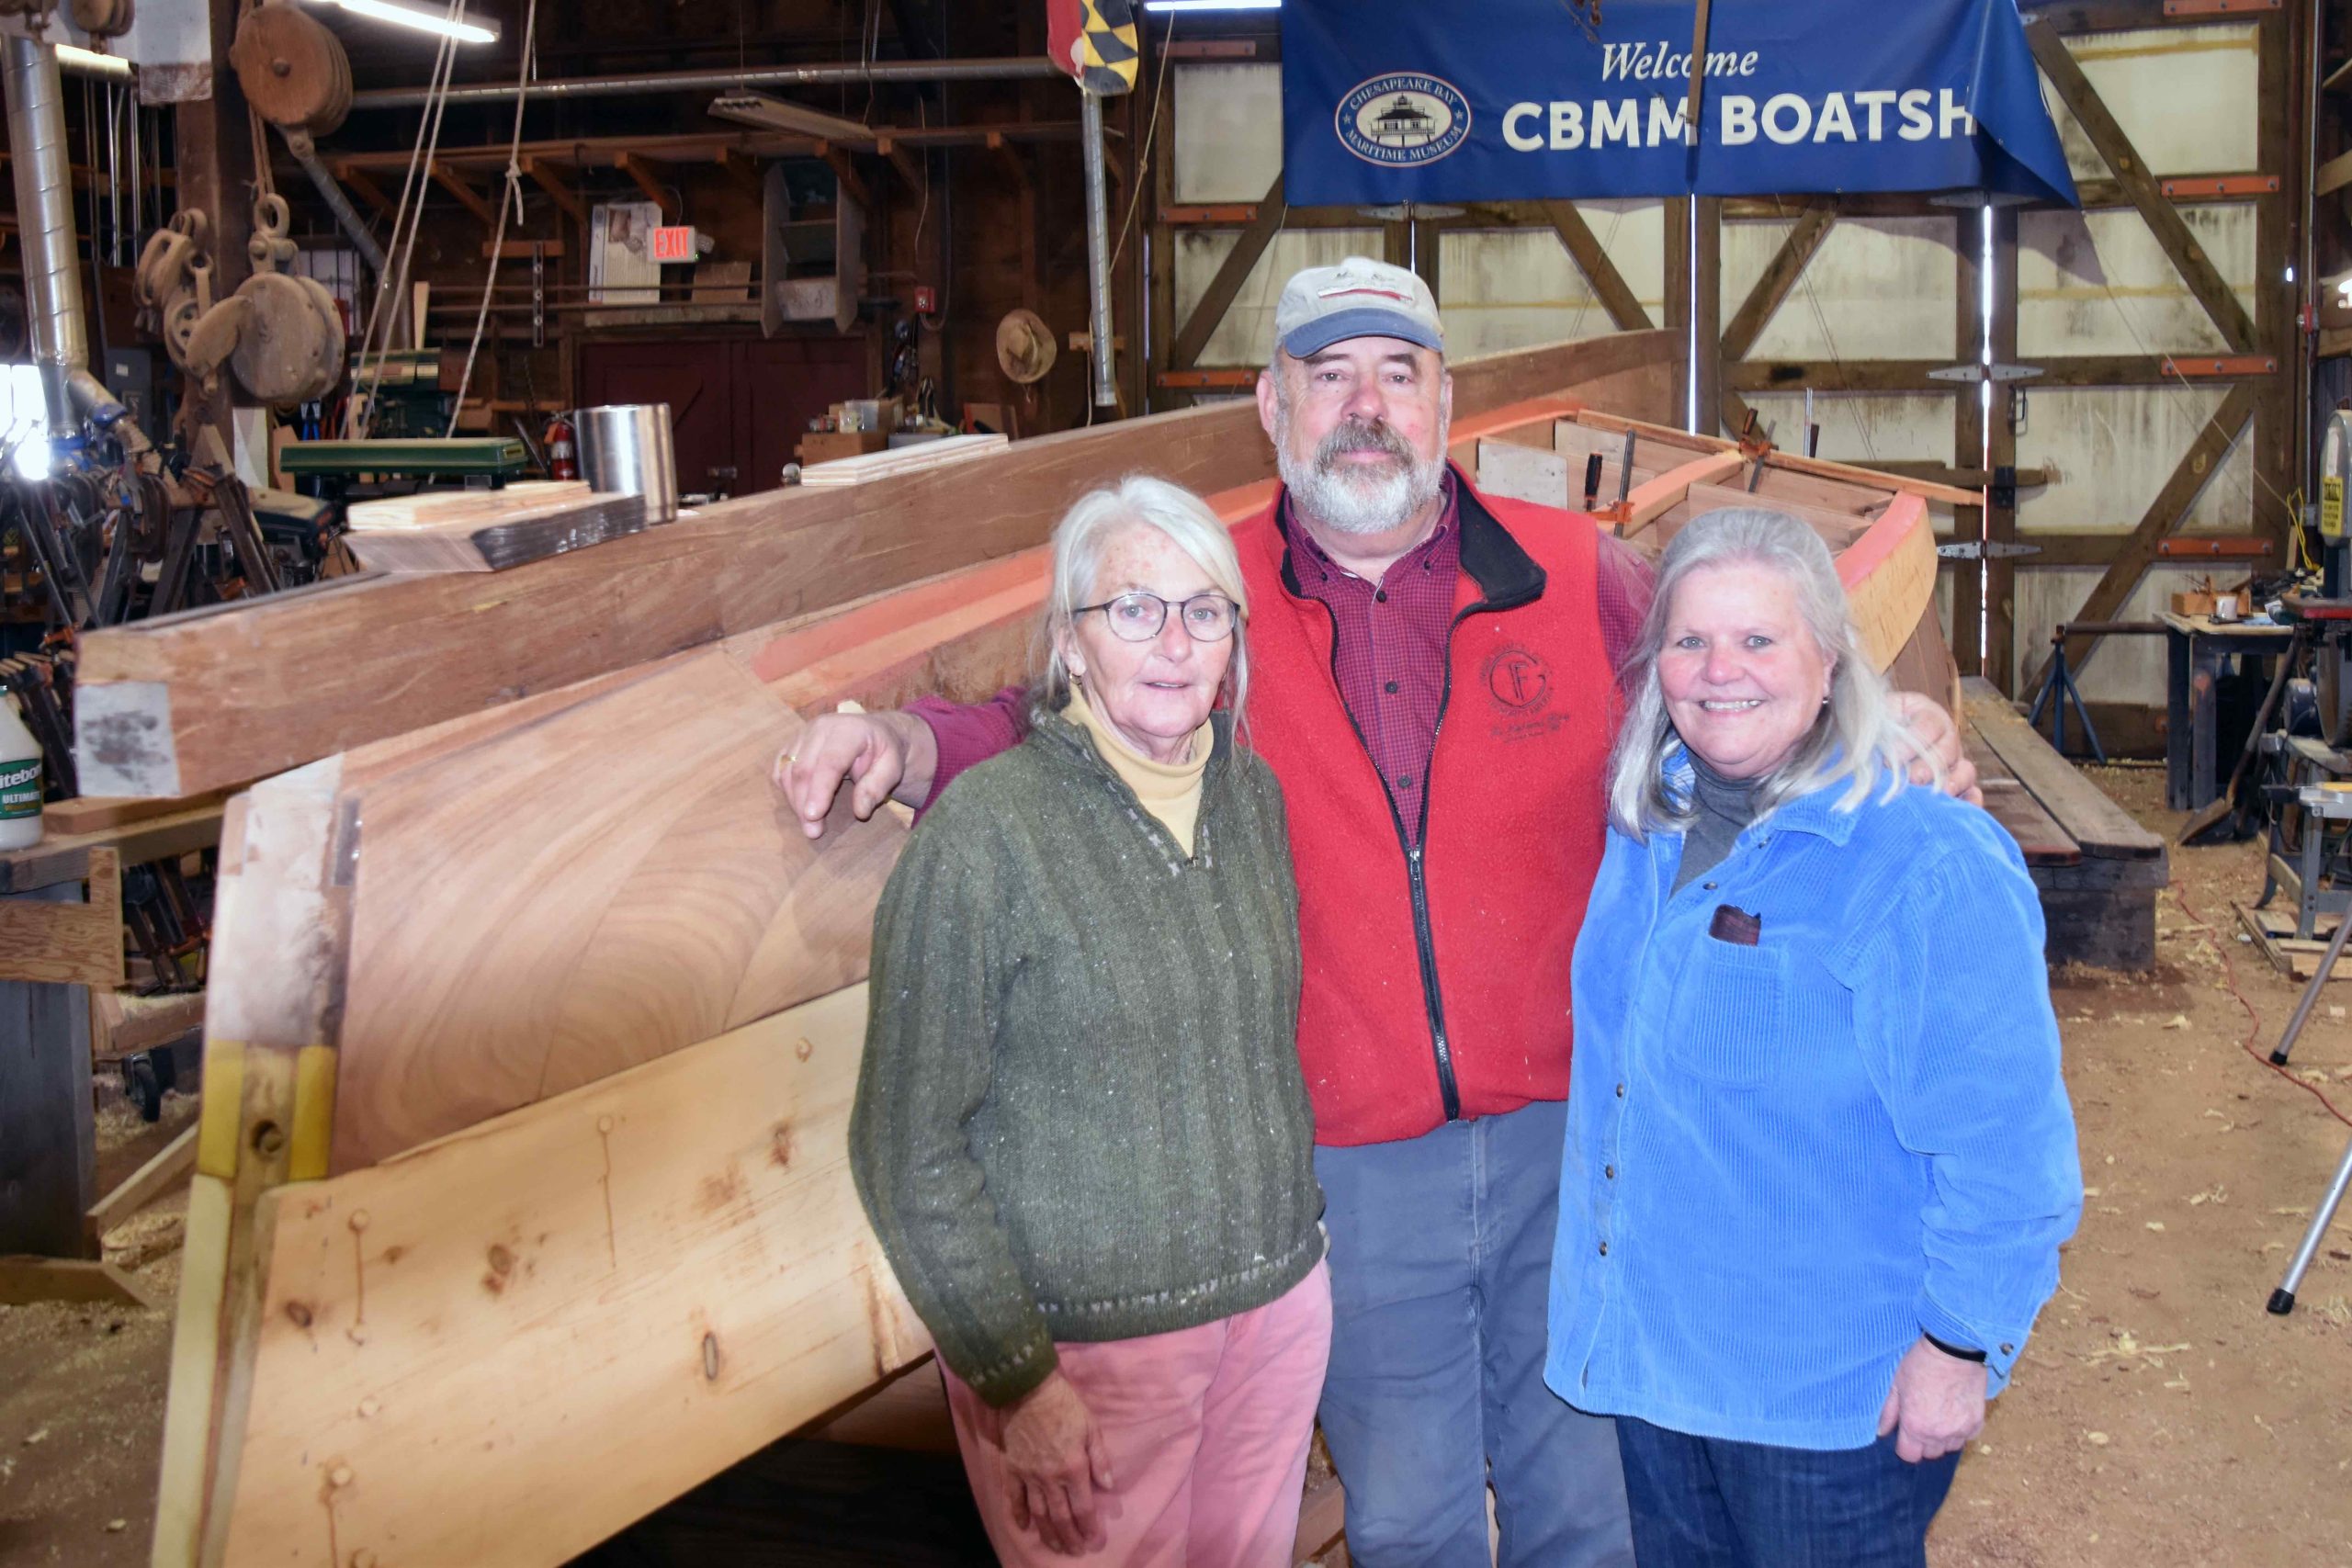 Grigg Mullen (center) was joined by Anne (left) and Susan (right) Whaley at the Shipyard Workday on Feb. 18.